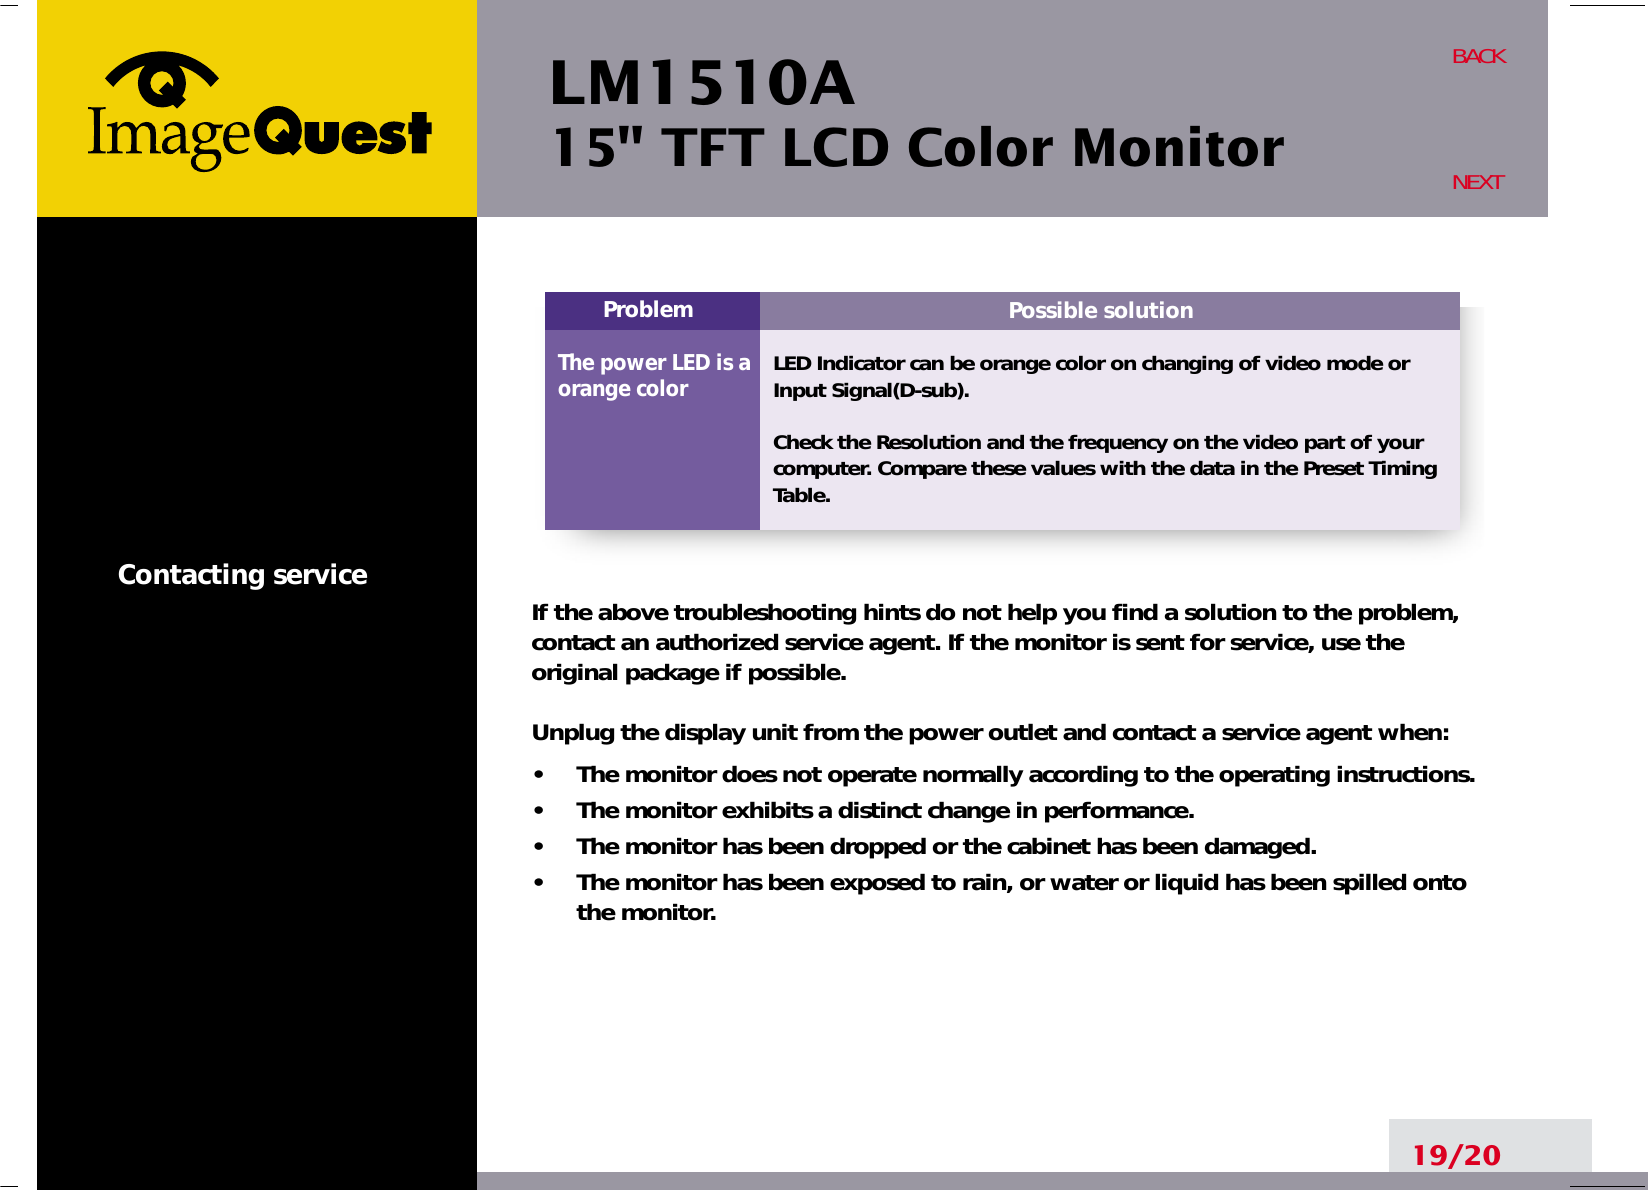 LM1510A15&quot; TFT LCD Color MonitorContacting service19/20BACKNEXTPossible solutionLED Indicator can be orange color on changing of video mode orInput Signal(D-sub).Check the Resolution and the frequency on the video part of yourcomputer. Compare these values with the data in the Preset TimingTable.ProblemThe power LED is aorange colorIf the above troubleshooting hints do not help you find a solution to the problem,contact an authorized service agent. If the monitor is sent for service, use theoriginal package if possible.Unplug the display unit from the power outlet and contact a service agent when:•     The monitor does not operate normally according to the operating instructions.•     The monitor exhibits a distinct change in performance.•     The monitor has been dropped or the cabinet has been damaged.•     The monitor has been exposed to rain, or water or liquid has been spilled ontothe monitor.